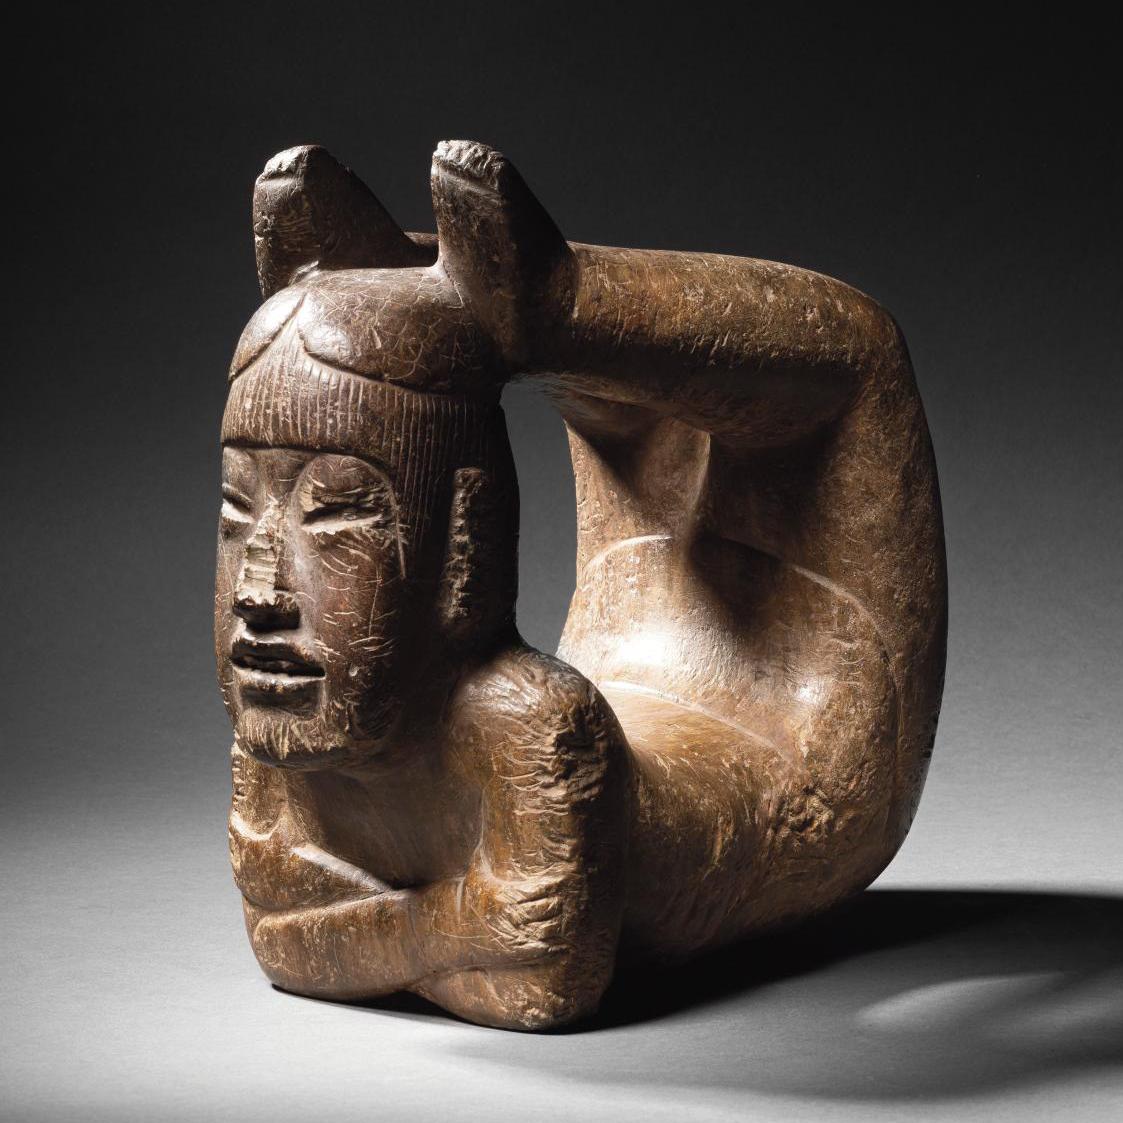 Olmec and Maya Artworks from Distinguished Pre-Colombian Collection Take Off